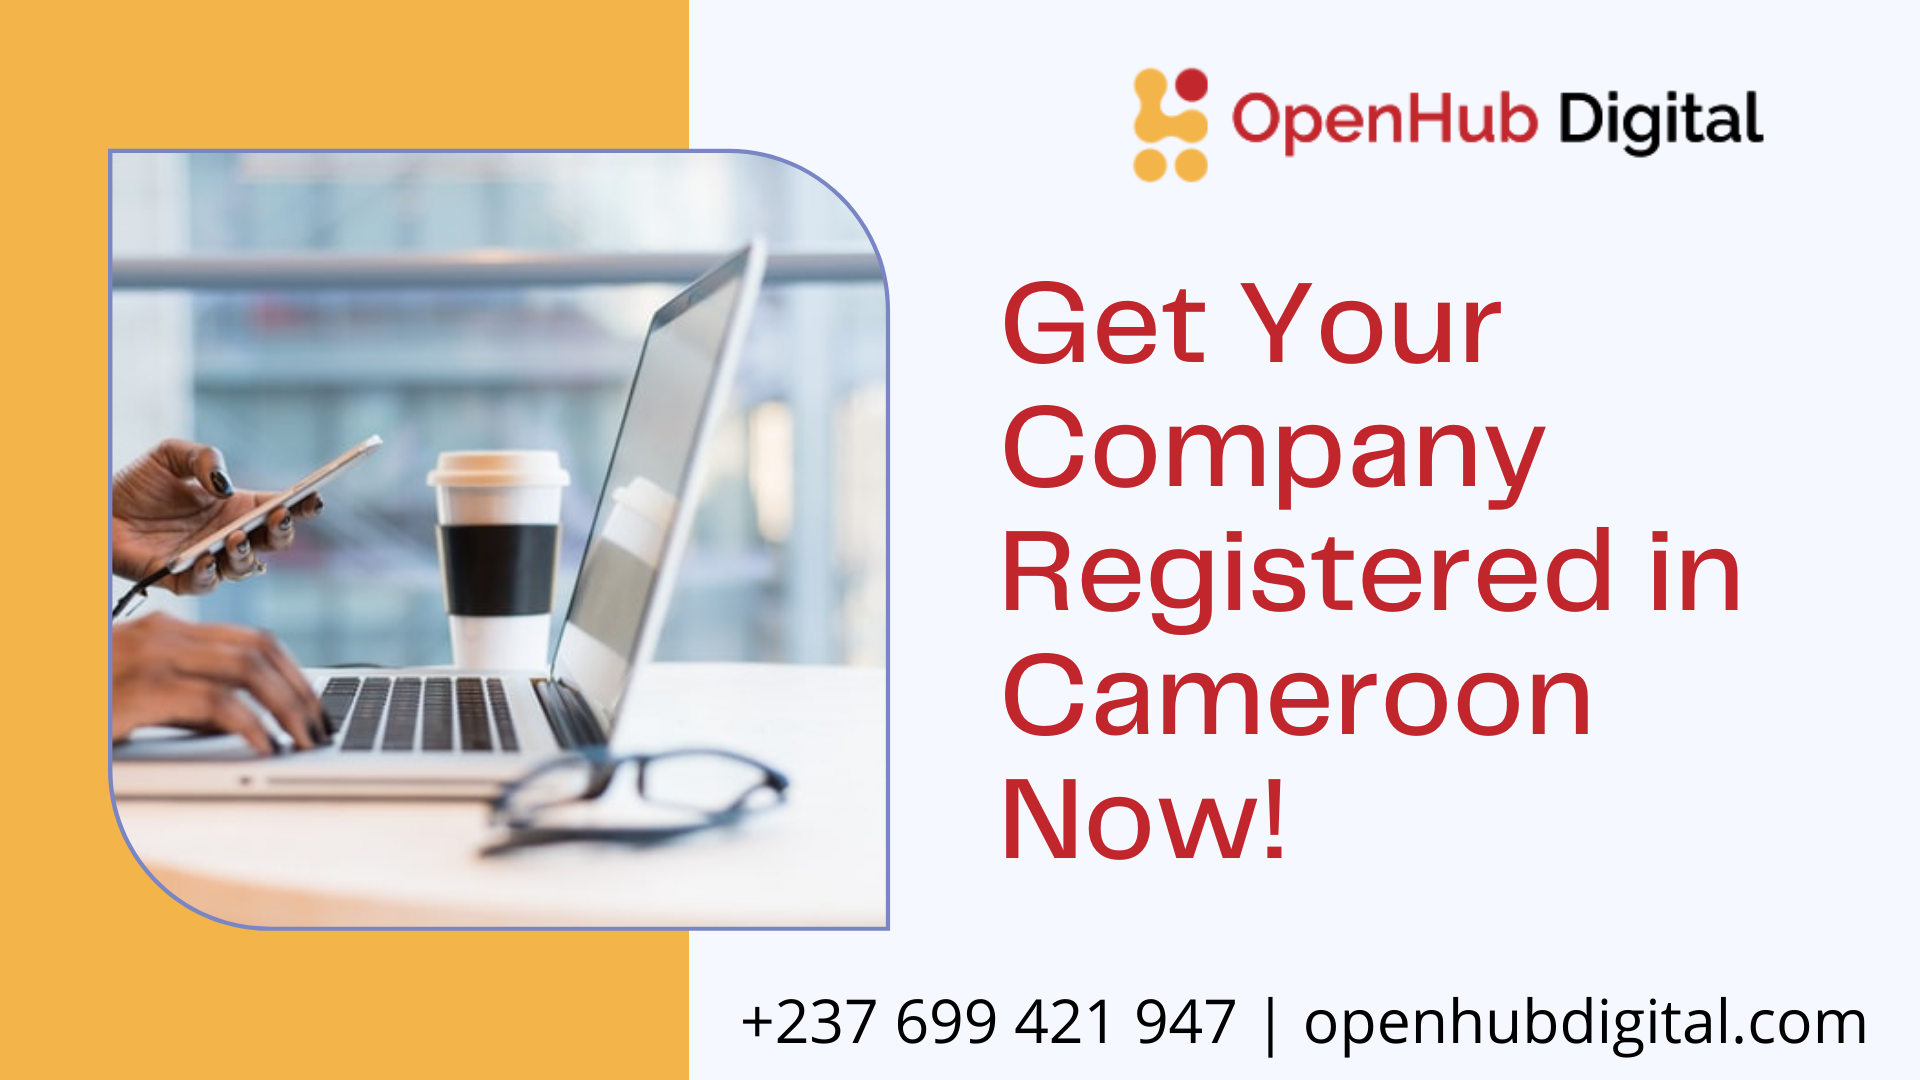 Register a new company in Cameroon